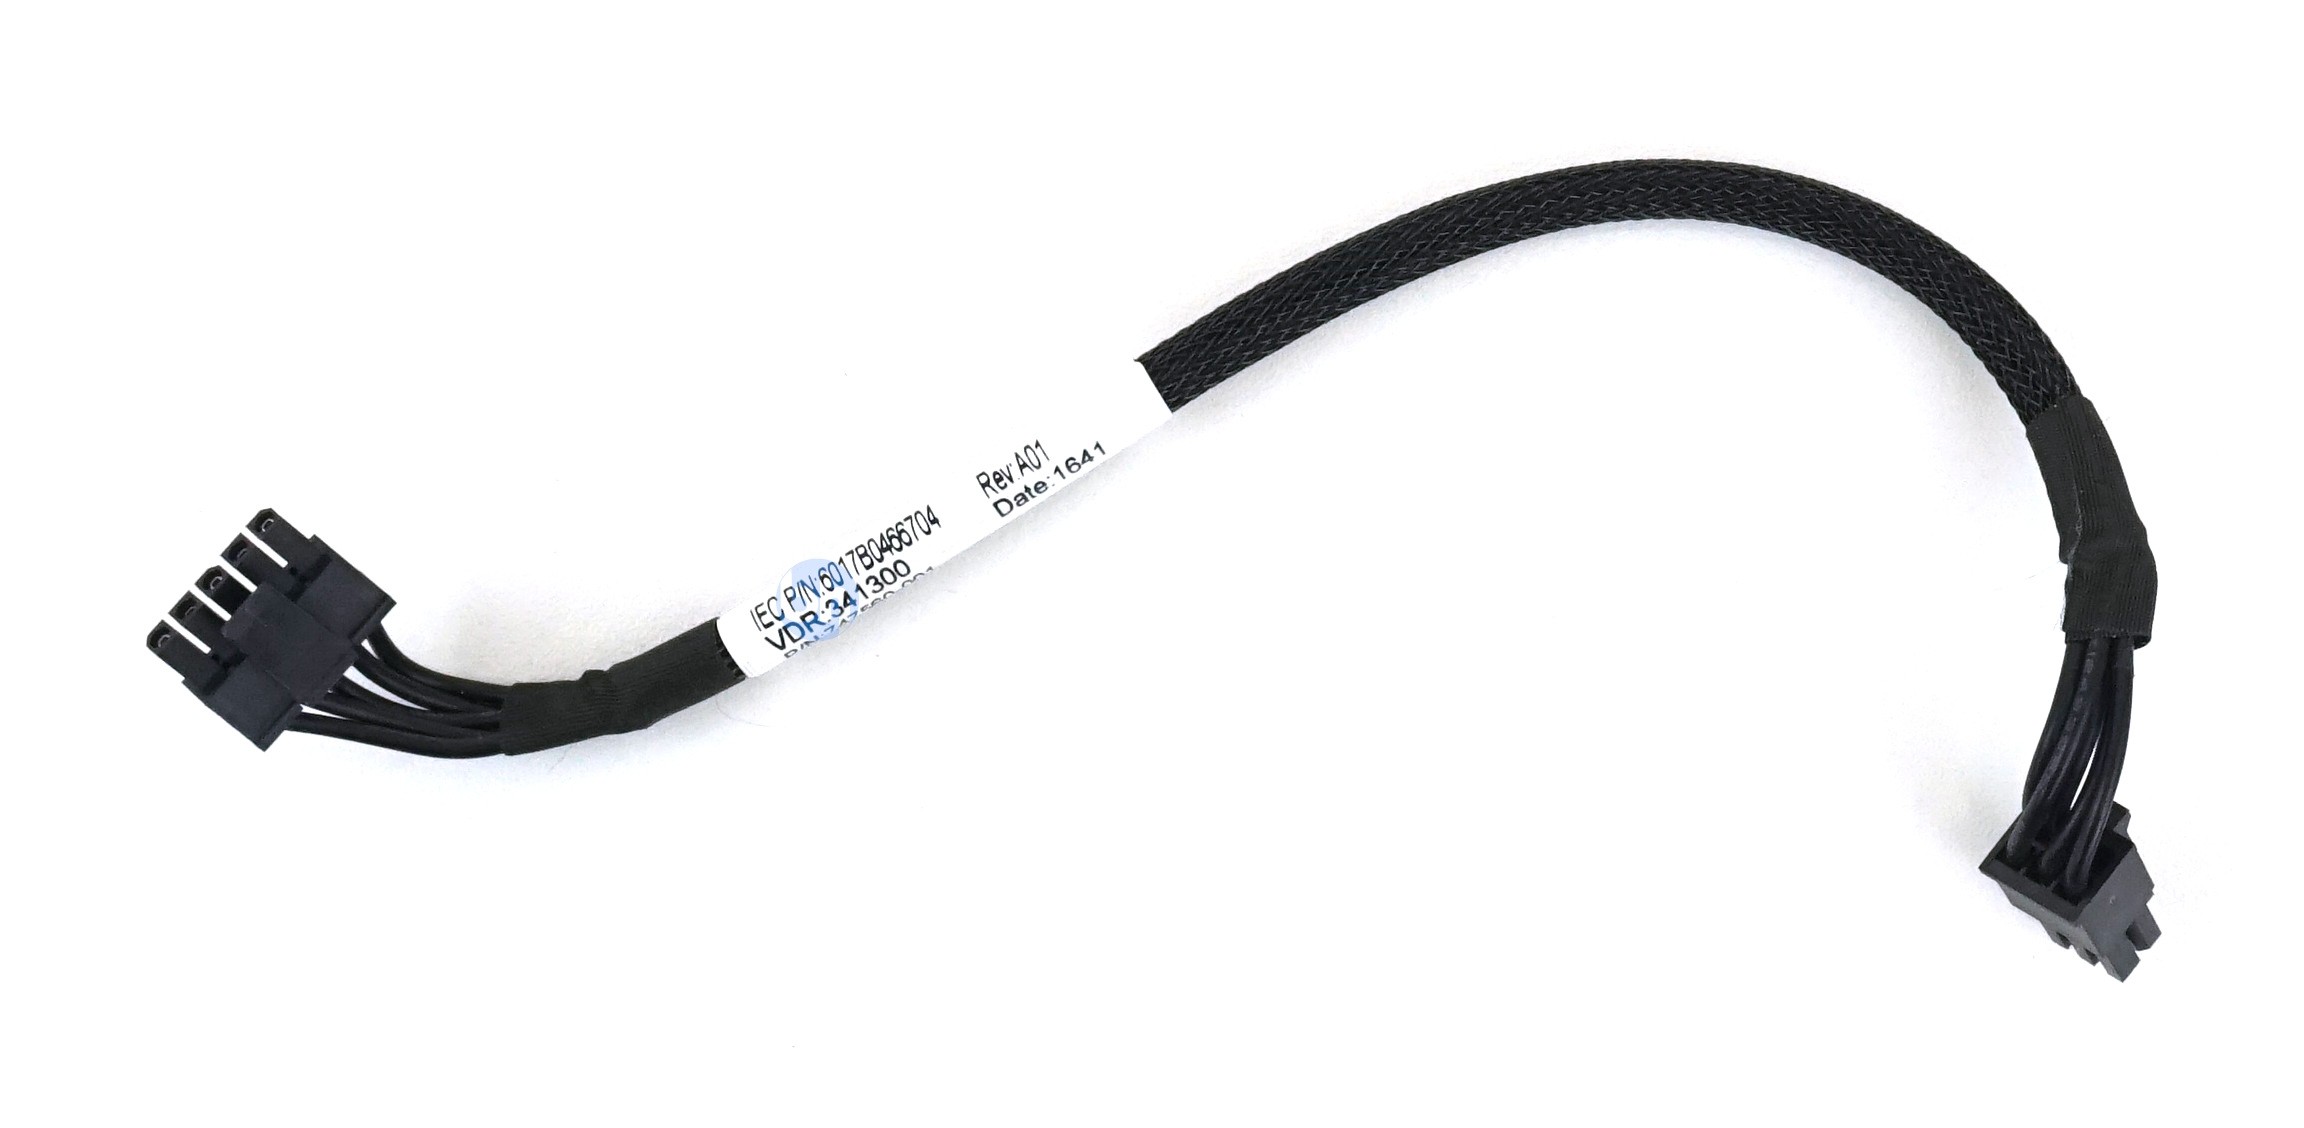 HP ProLiant DL380 Gen9 8xSFF Backplane Power Cable 9"